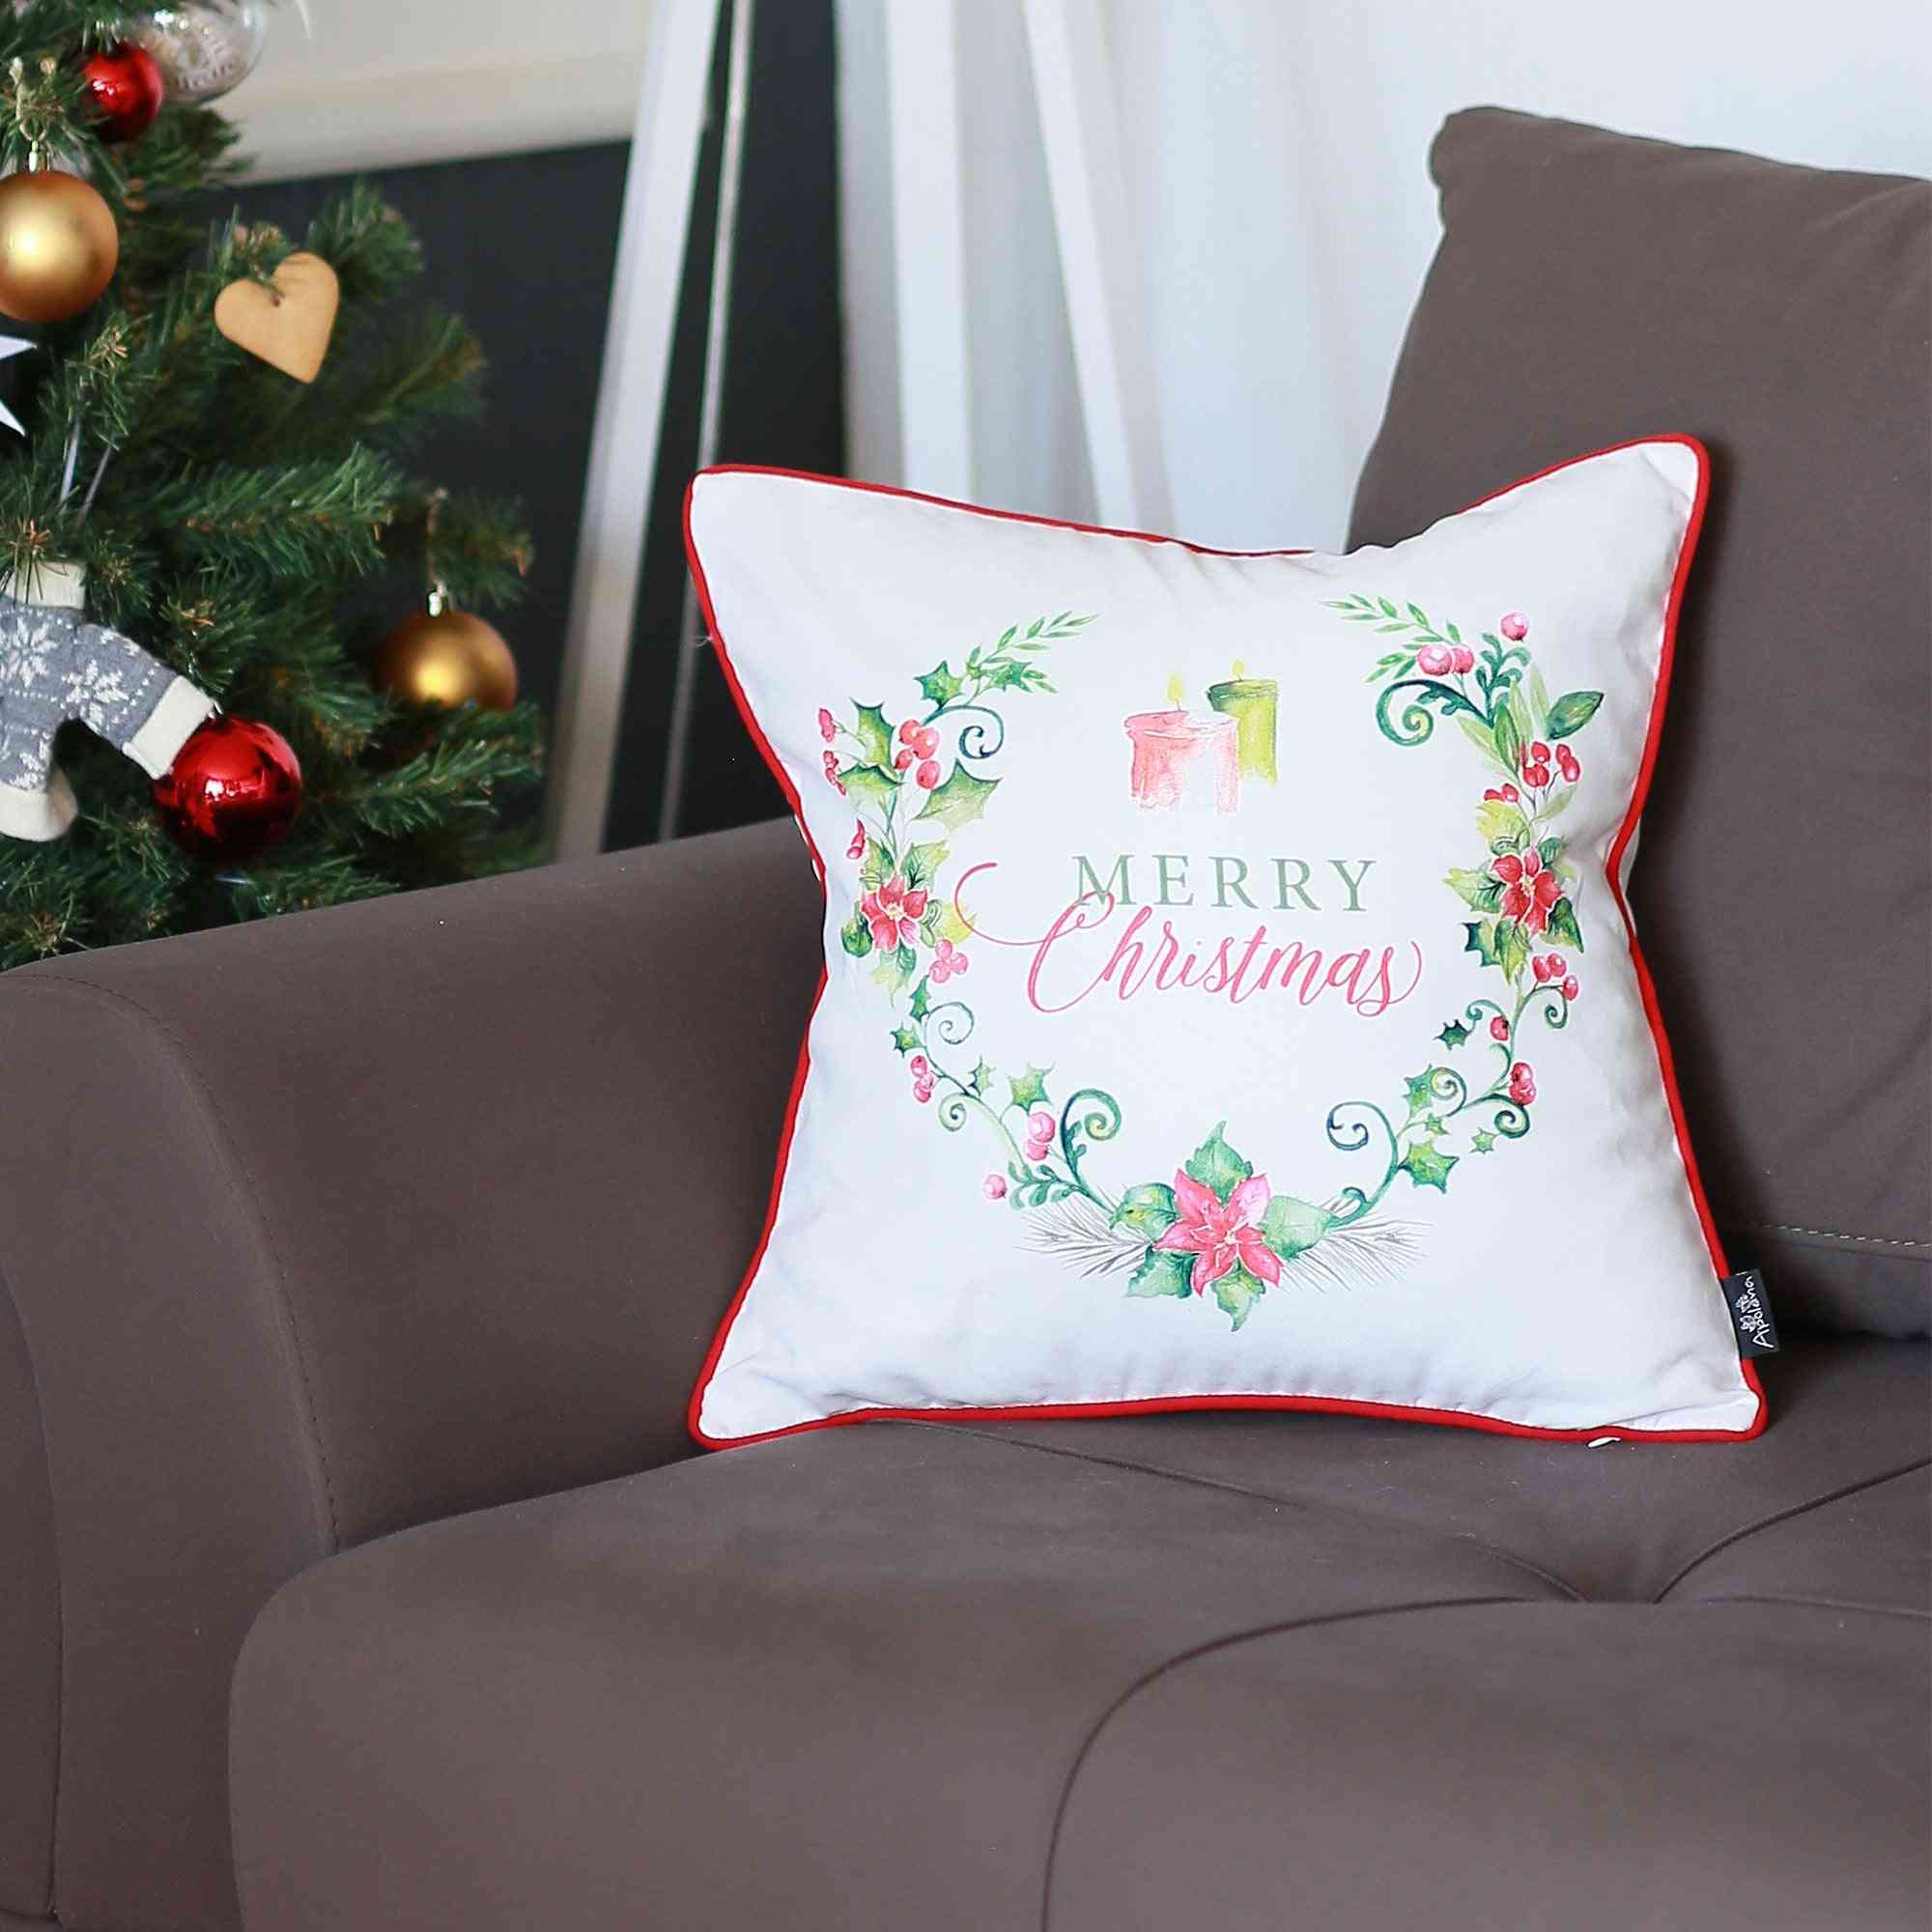 Christmas Wreath With Flowers And Text-decorative Pillow Cover